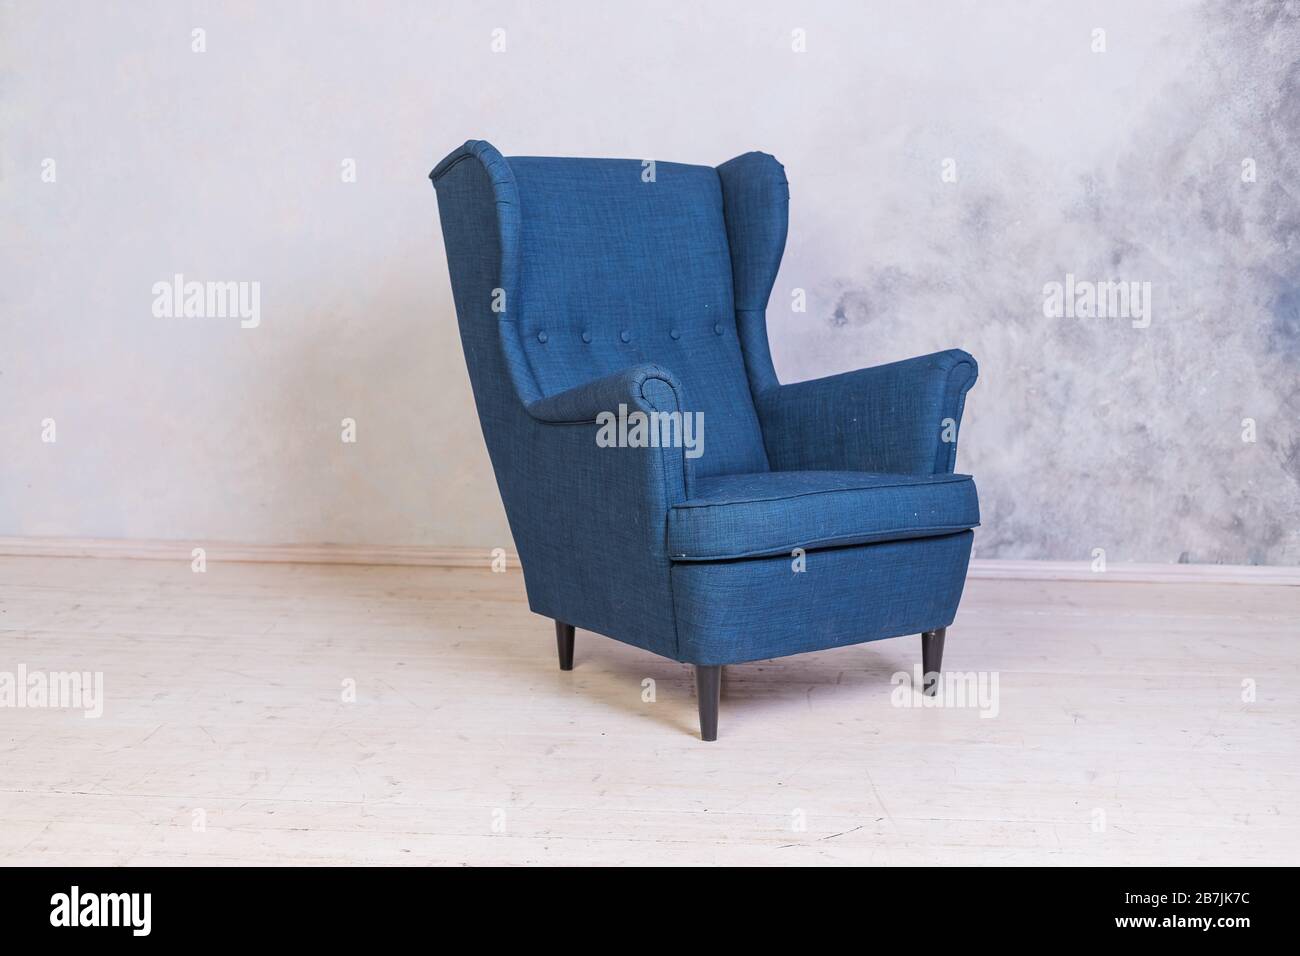 Classic blue chair. loft interior.Comfortable armchair against concrete  wall background.Scandinavian style.Minimal Modern Furniture Recliner Object  in Stock Photo - Alamy